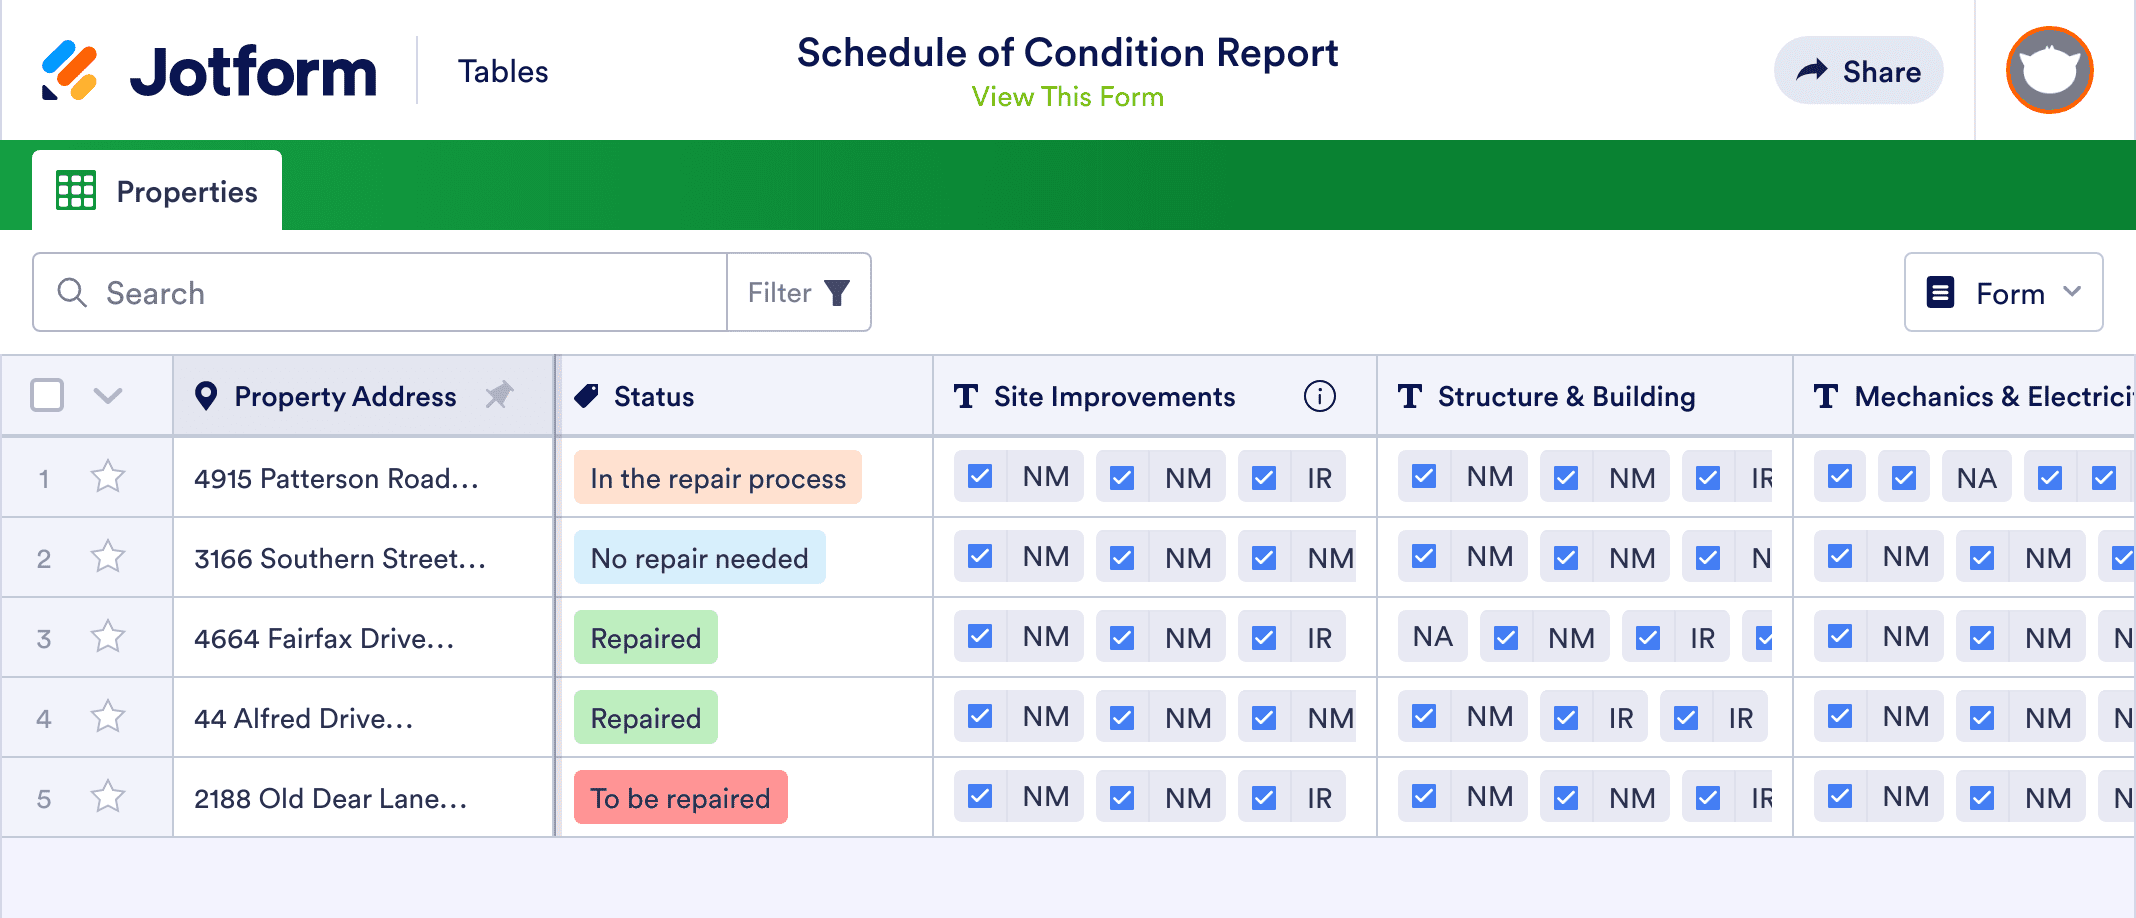 Schedule of Condition Report Template | Jotform Tables